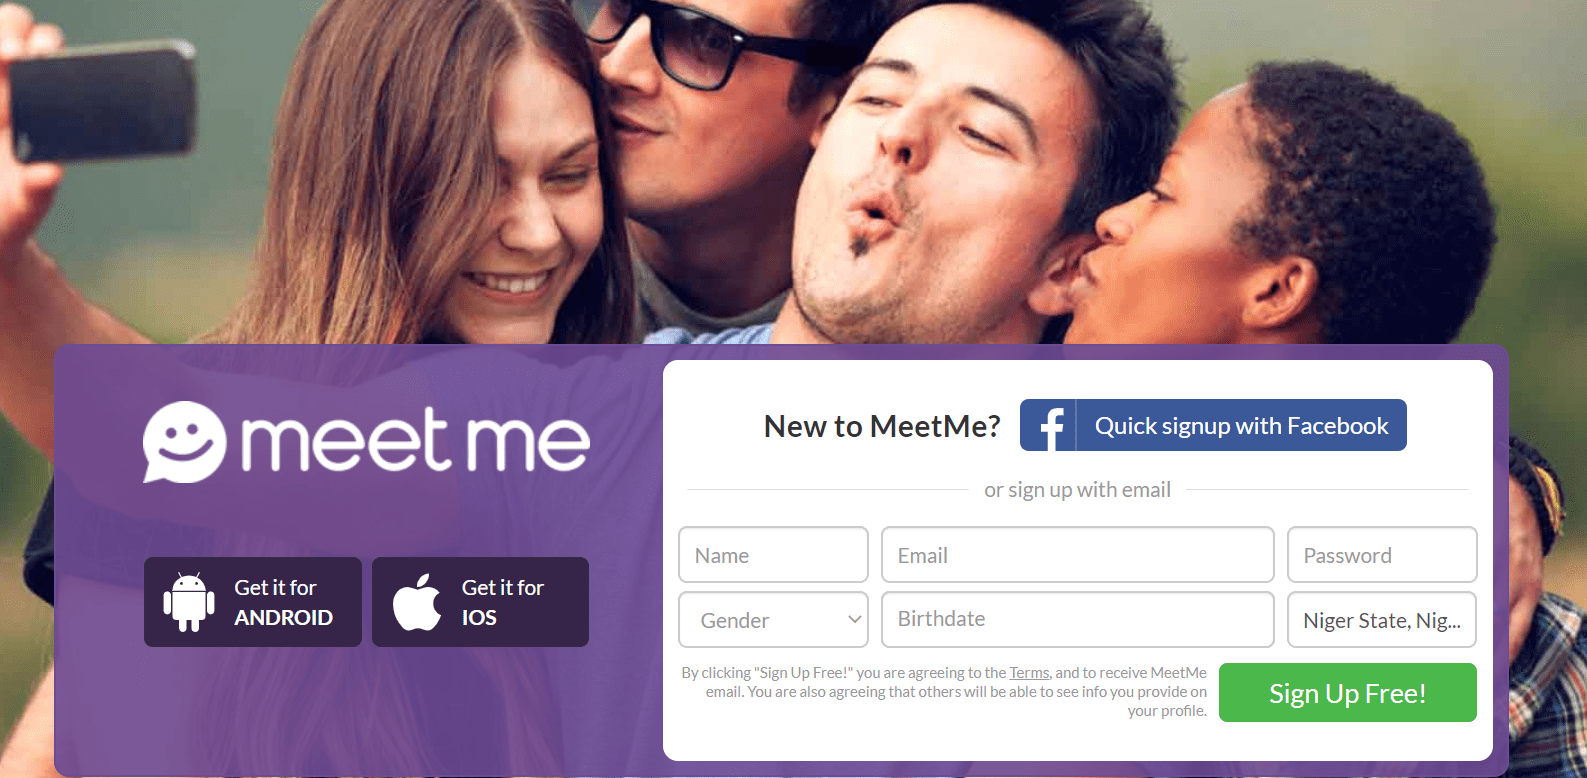 People meetme? on track can you Meet Me